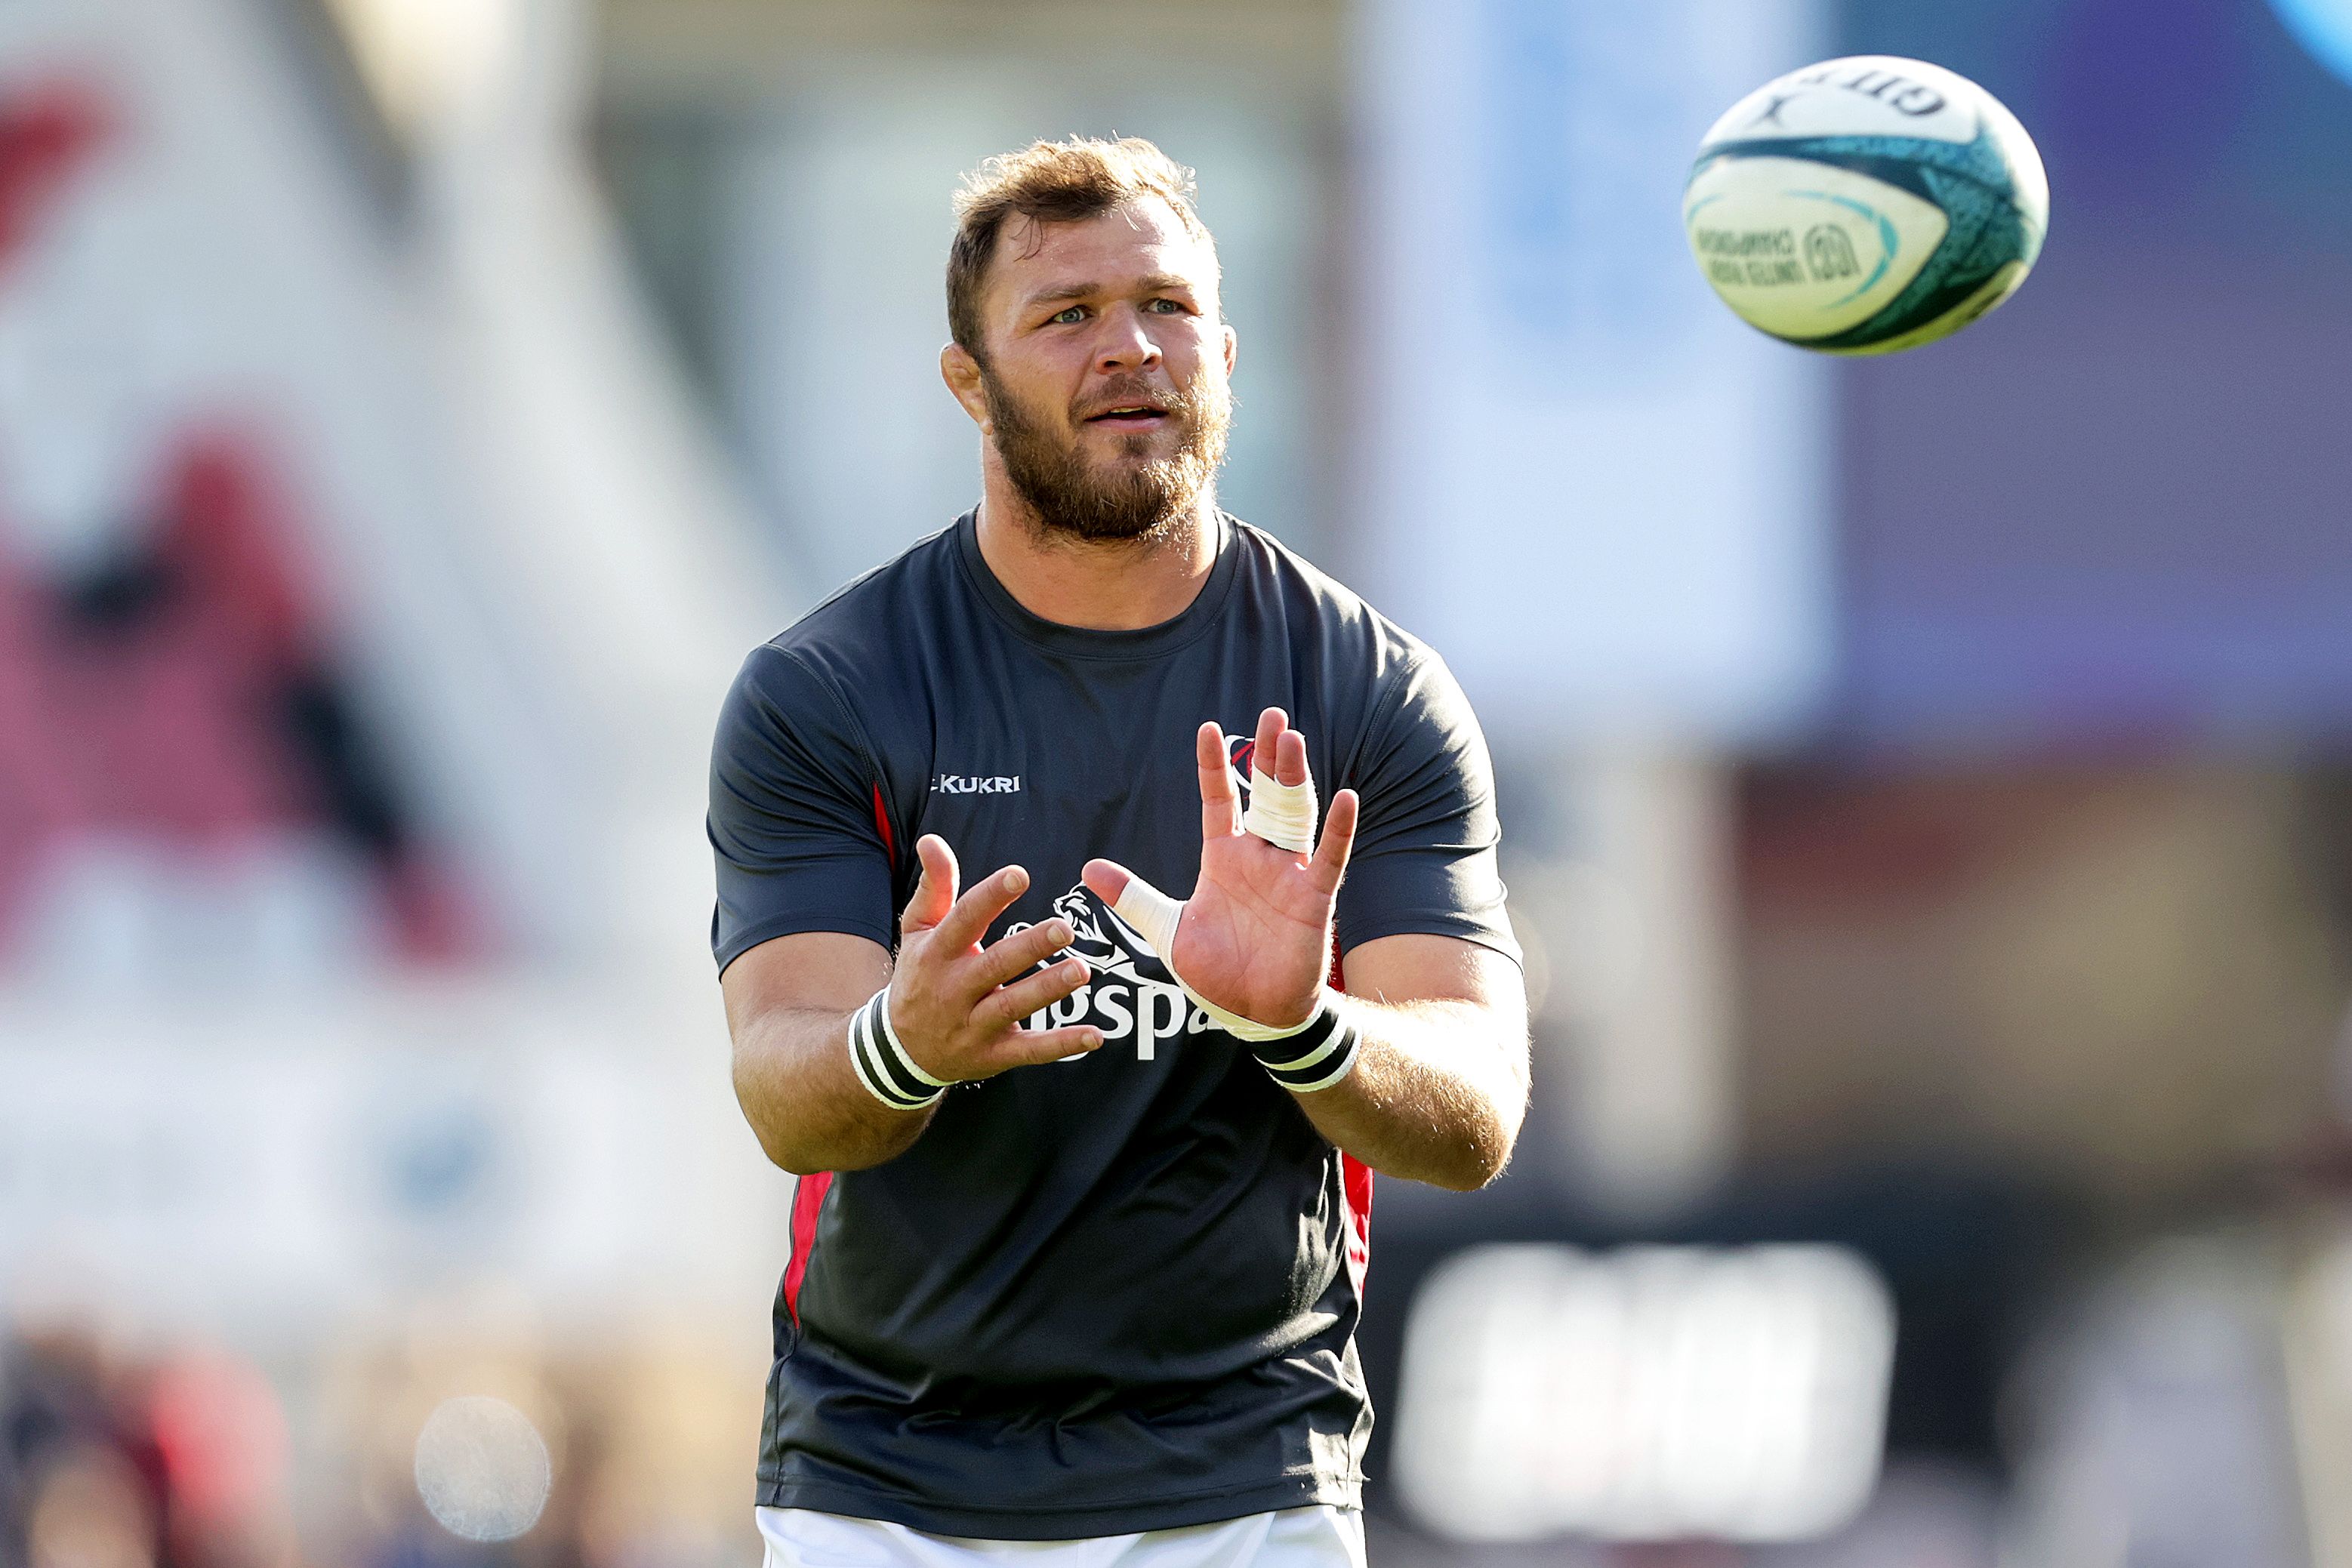 Duane Vermeulen will make his first appearance for Ulster this season having returned from international duty with South Africa 